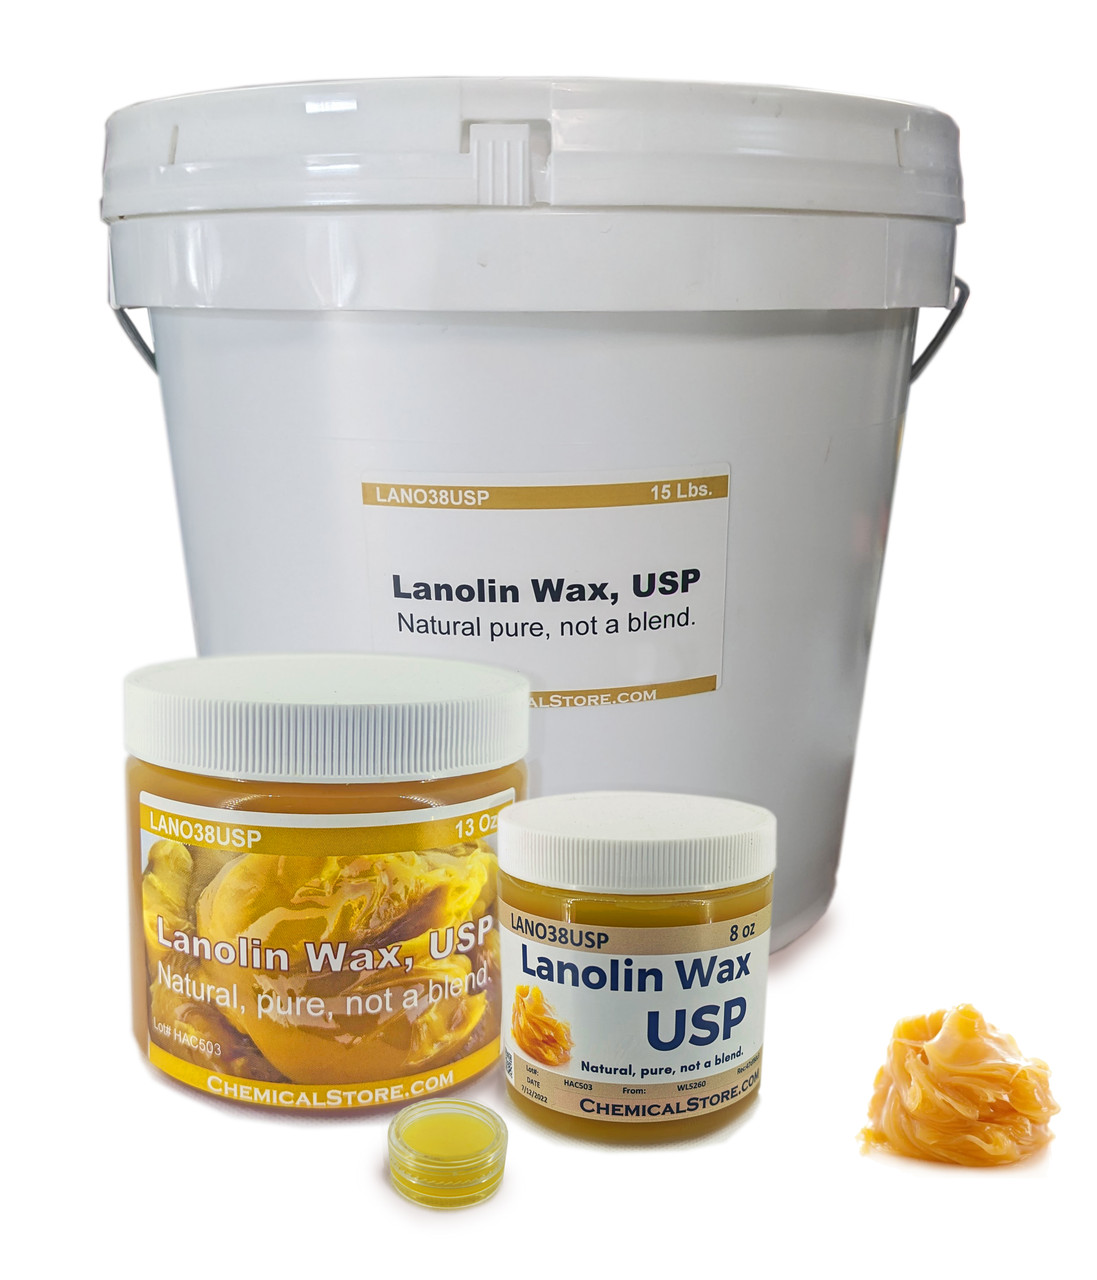 Lanolin Wax, USP Grade is a high-quality wax that is derived from lanolin, a natural substance found in sheep's wool. This wax is widely used in the cosmetics and pharmaceutical industries for its emollient and moisturizing properties. It is also used in the production of ointments, creams, and lotions. Our Lanolin Wax, USP Grade is of the highest quality and purity, making it an ideal choice for a wide range of applications.